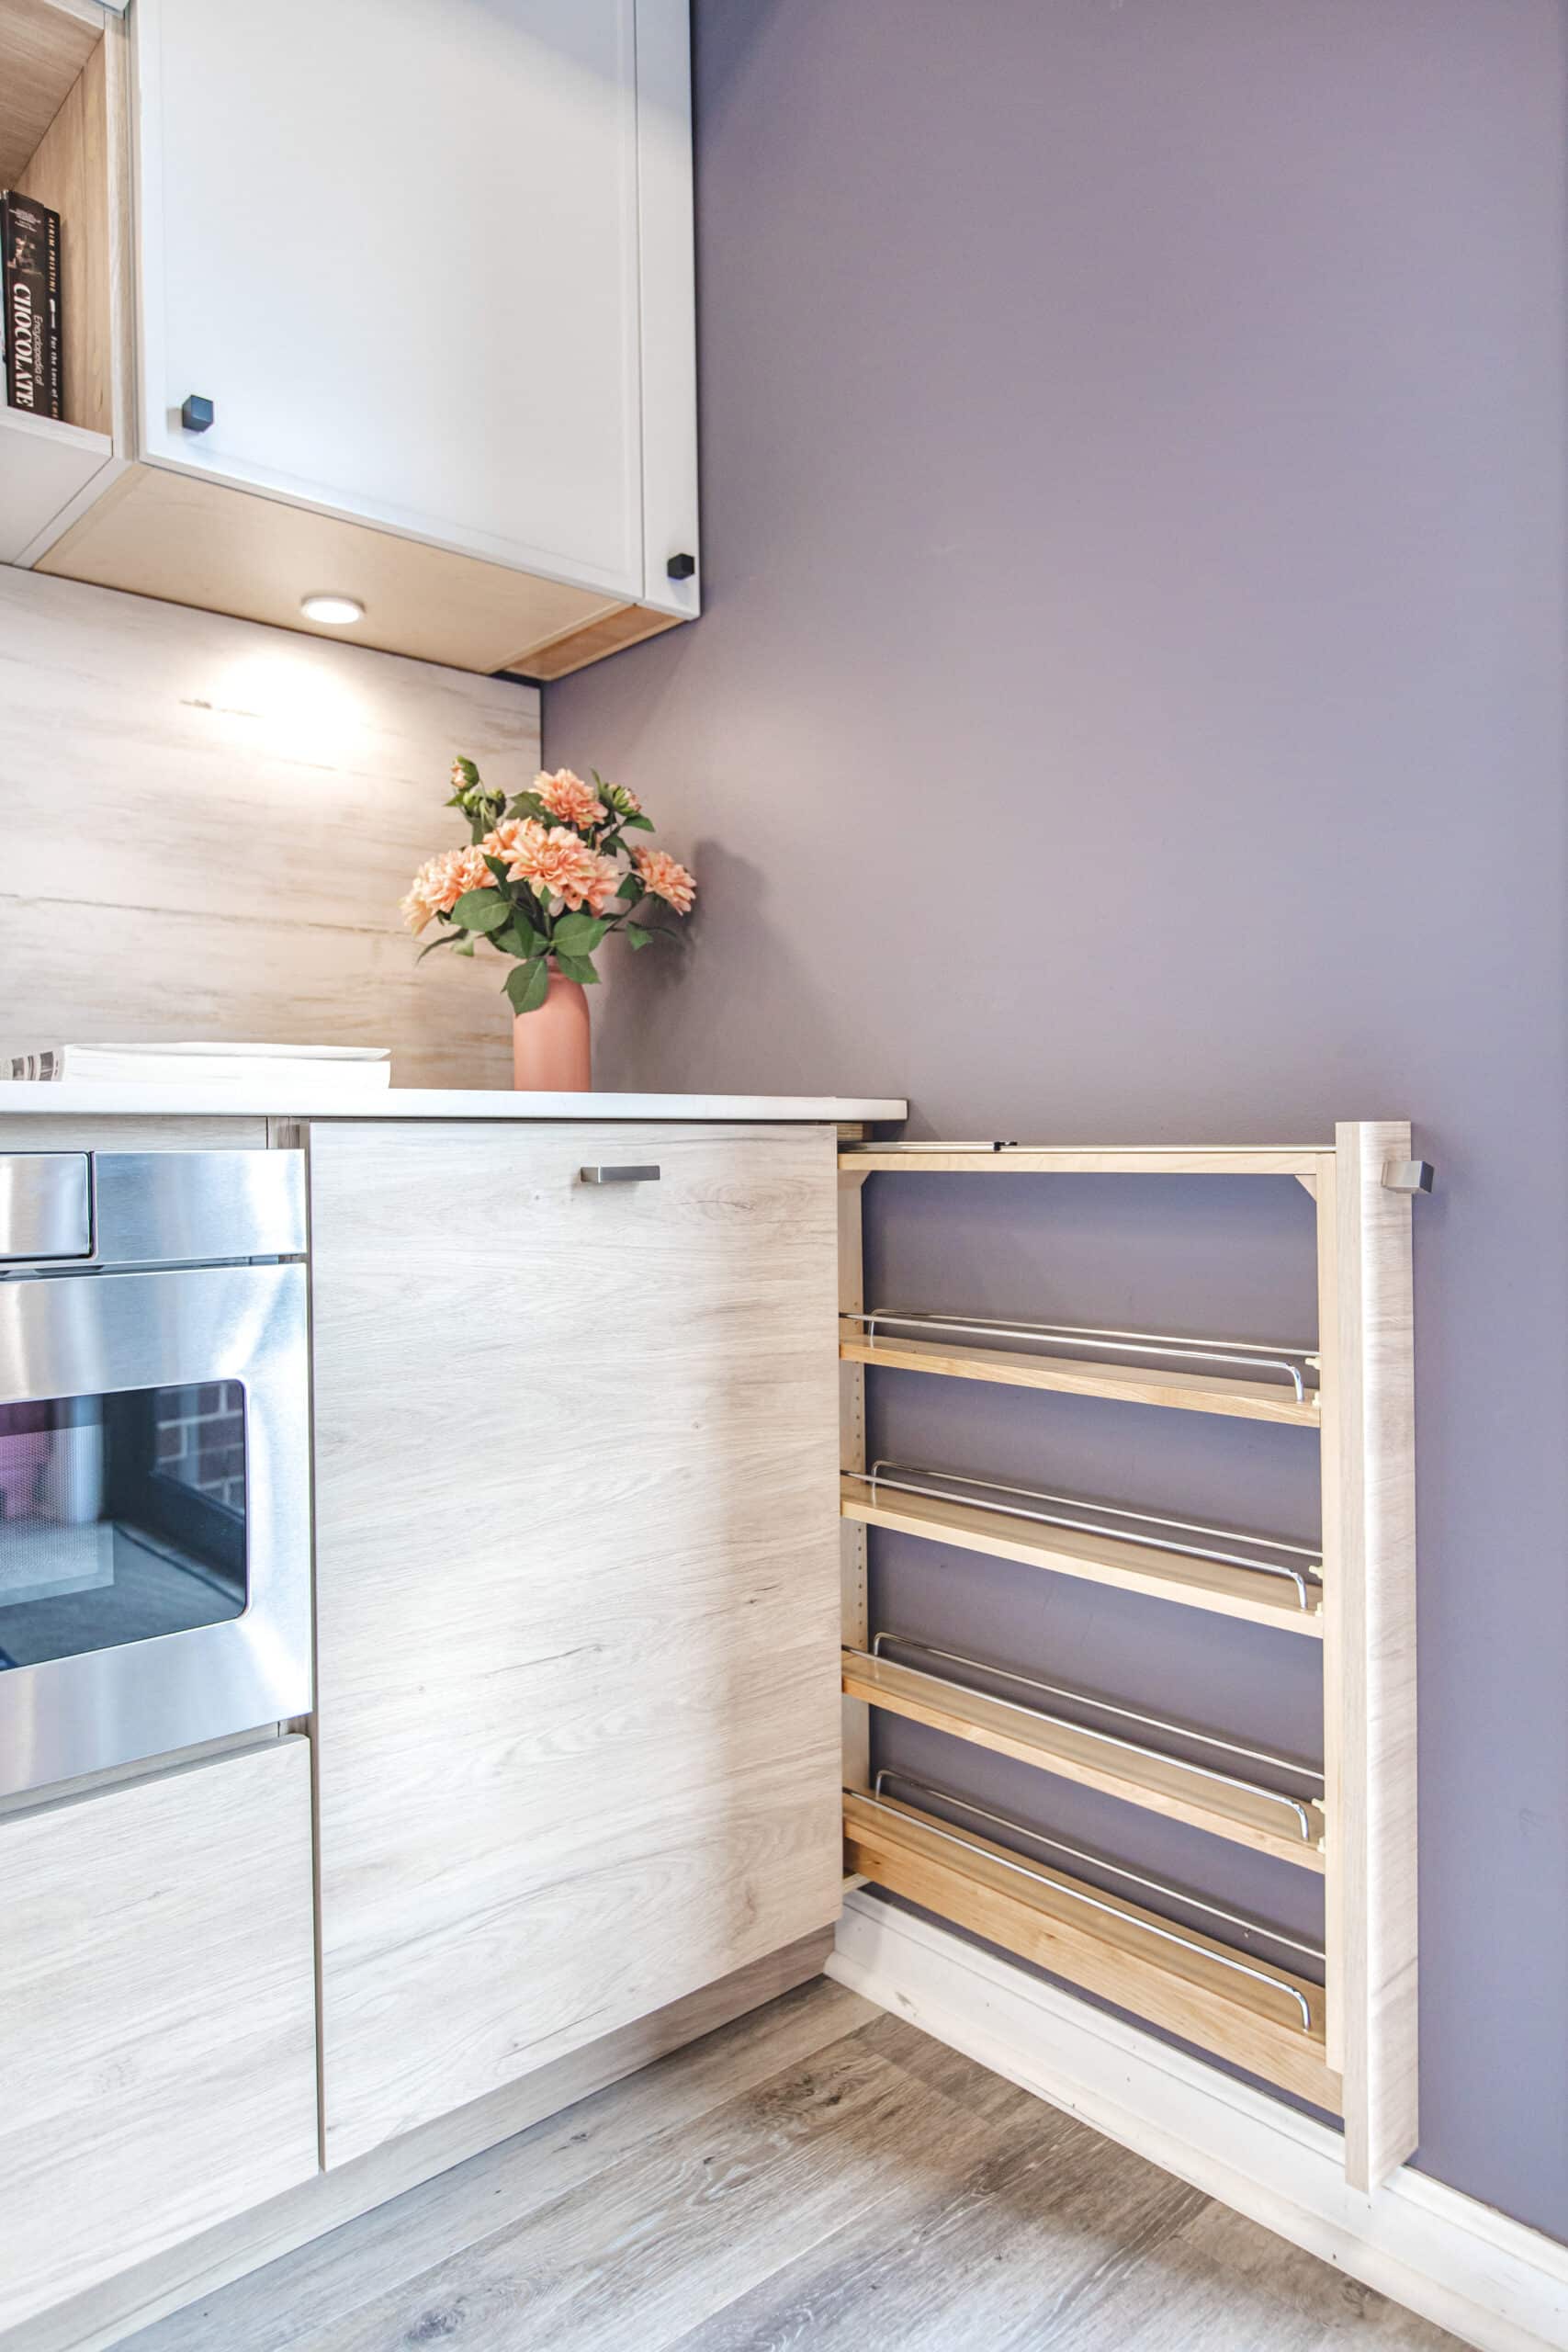 A kitchen with a wooden shelf and a purple wall